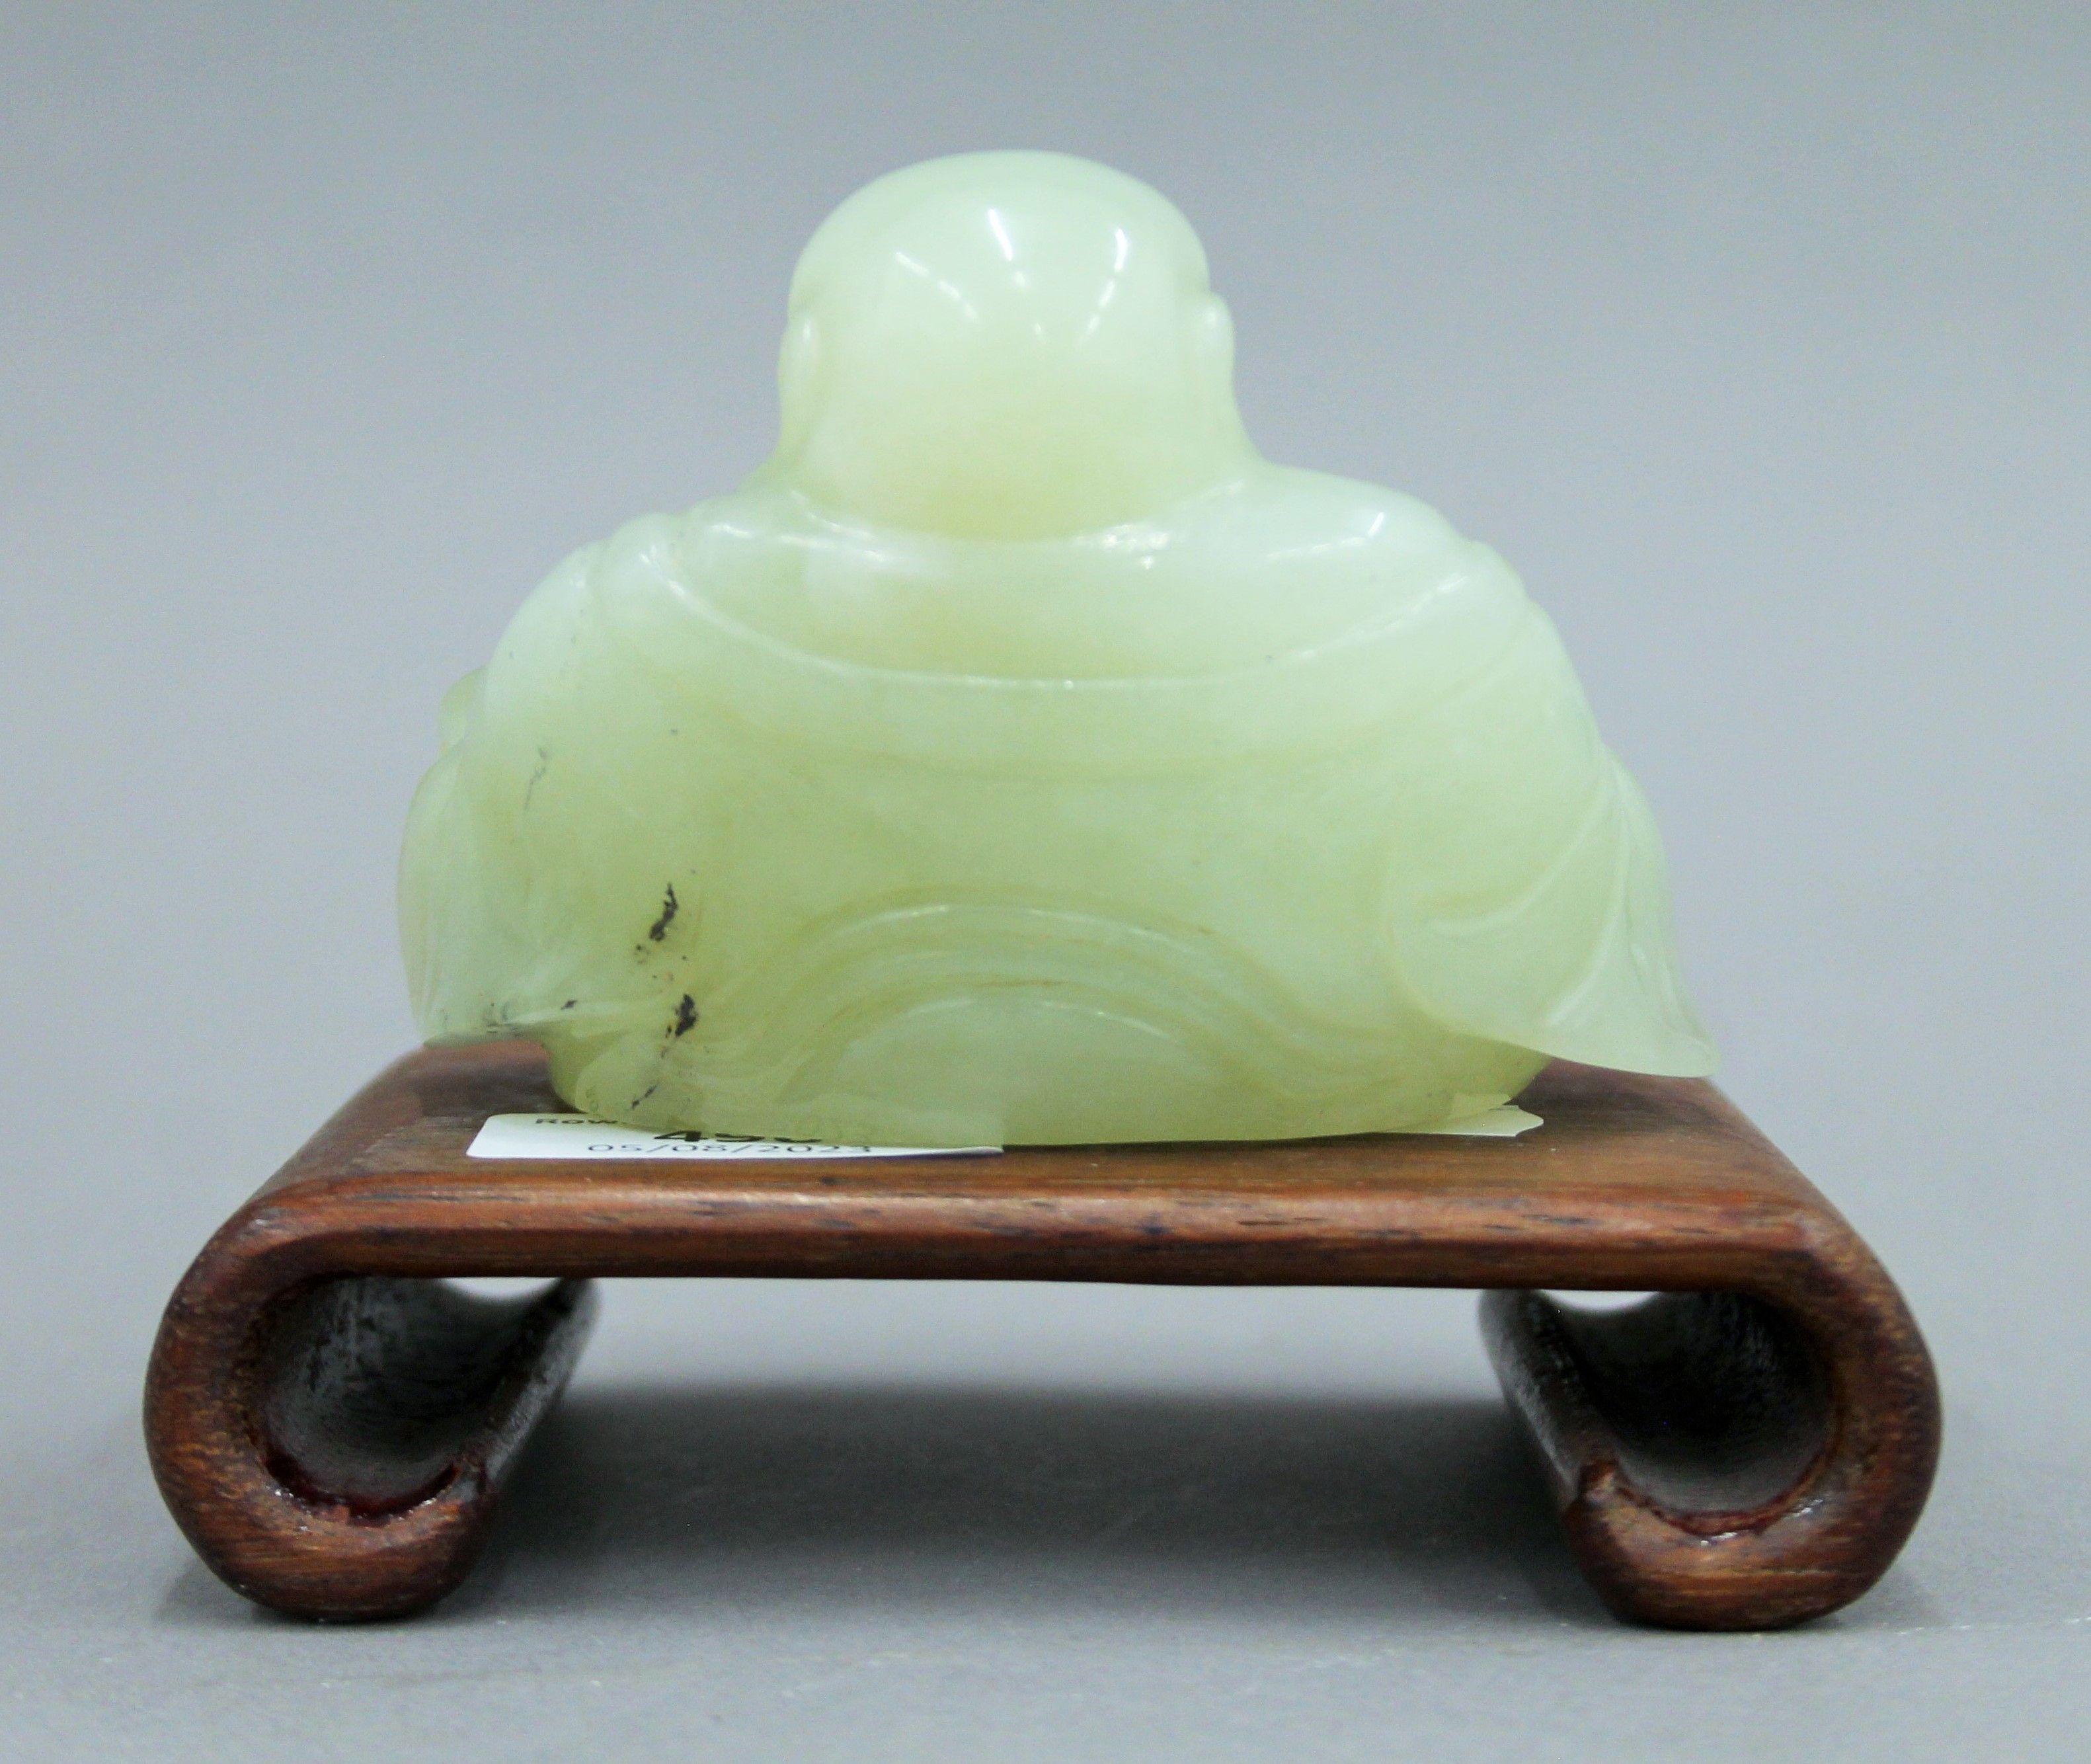 A Chinese model of Buddha on a wooden stand. 10 cm high overall. - Image 5 of 5